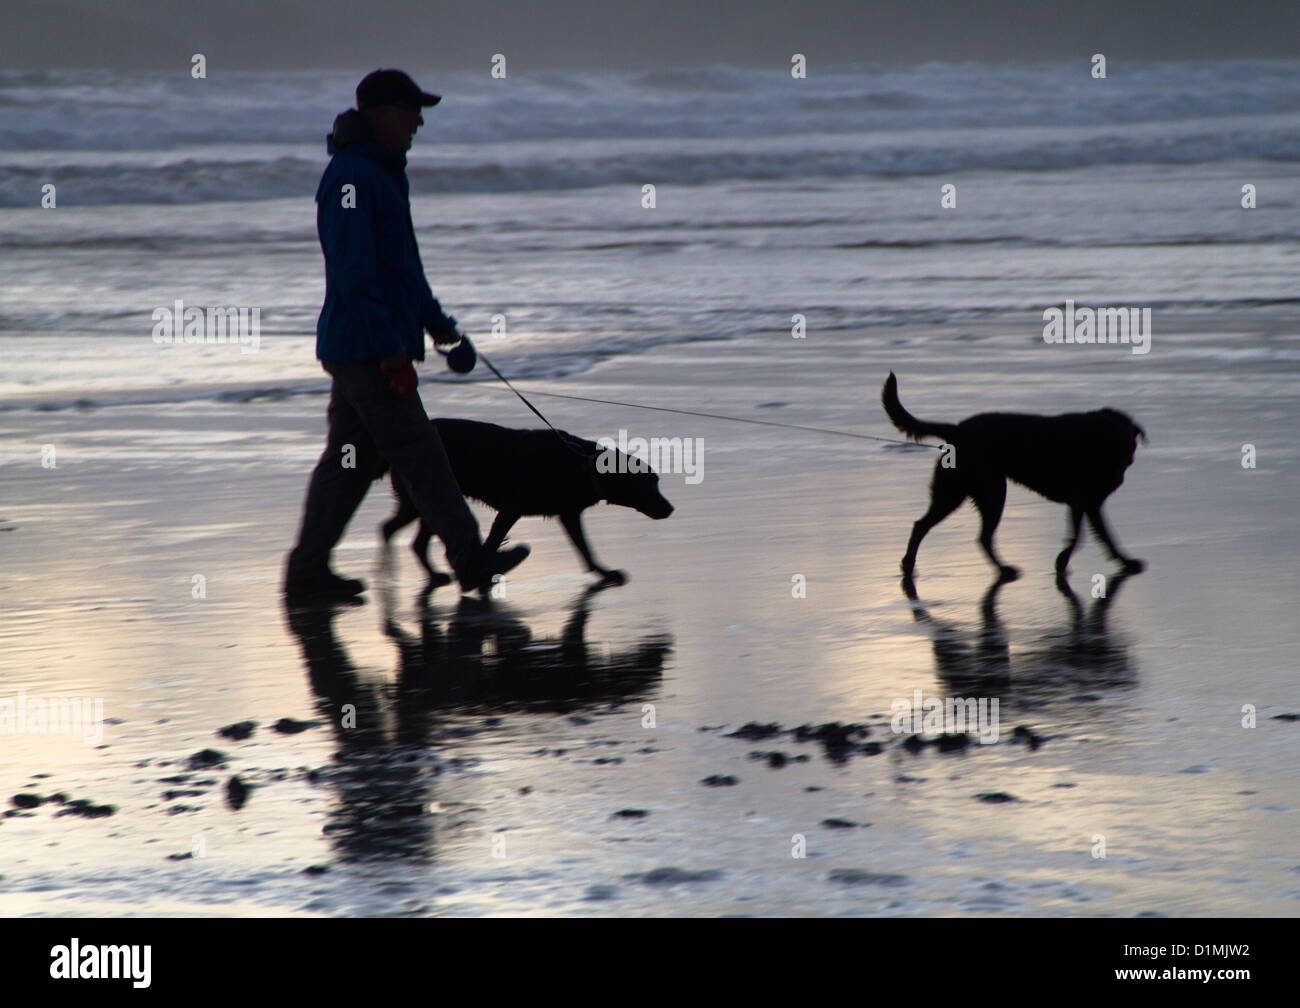 Man walking on beach with 2 dogs Stock Photo